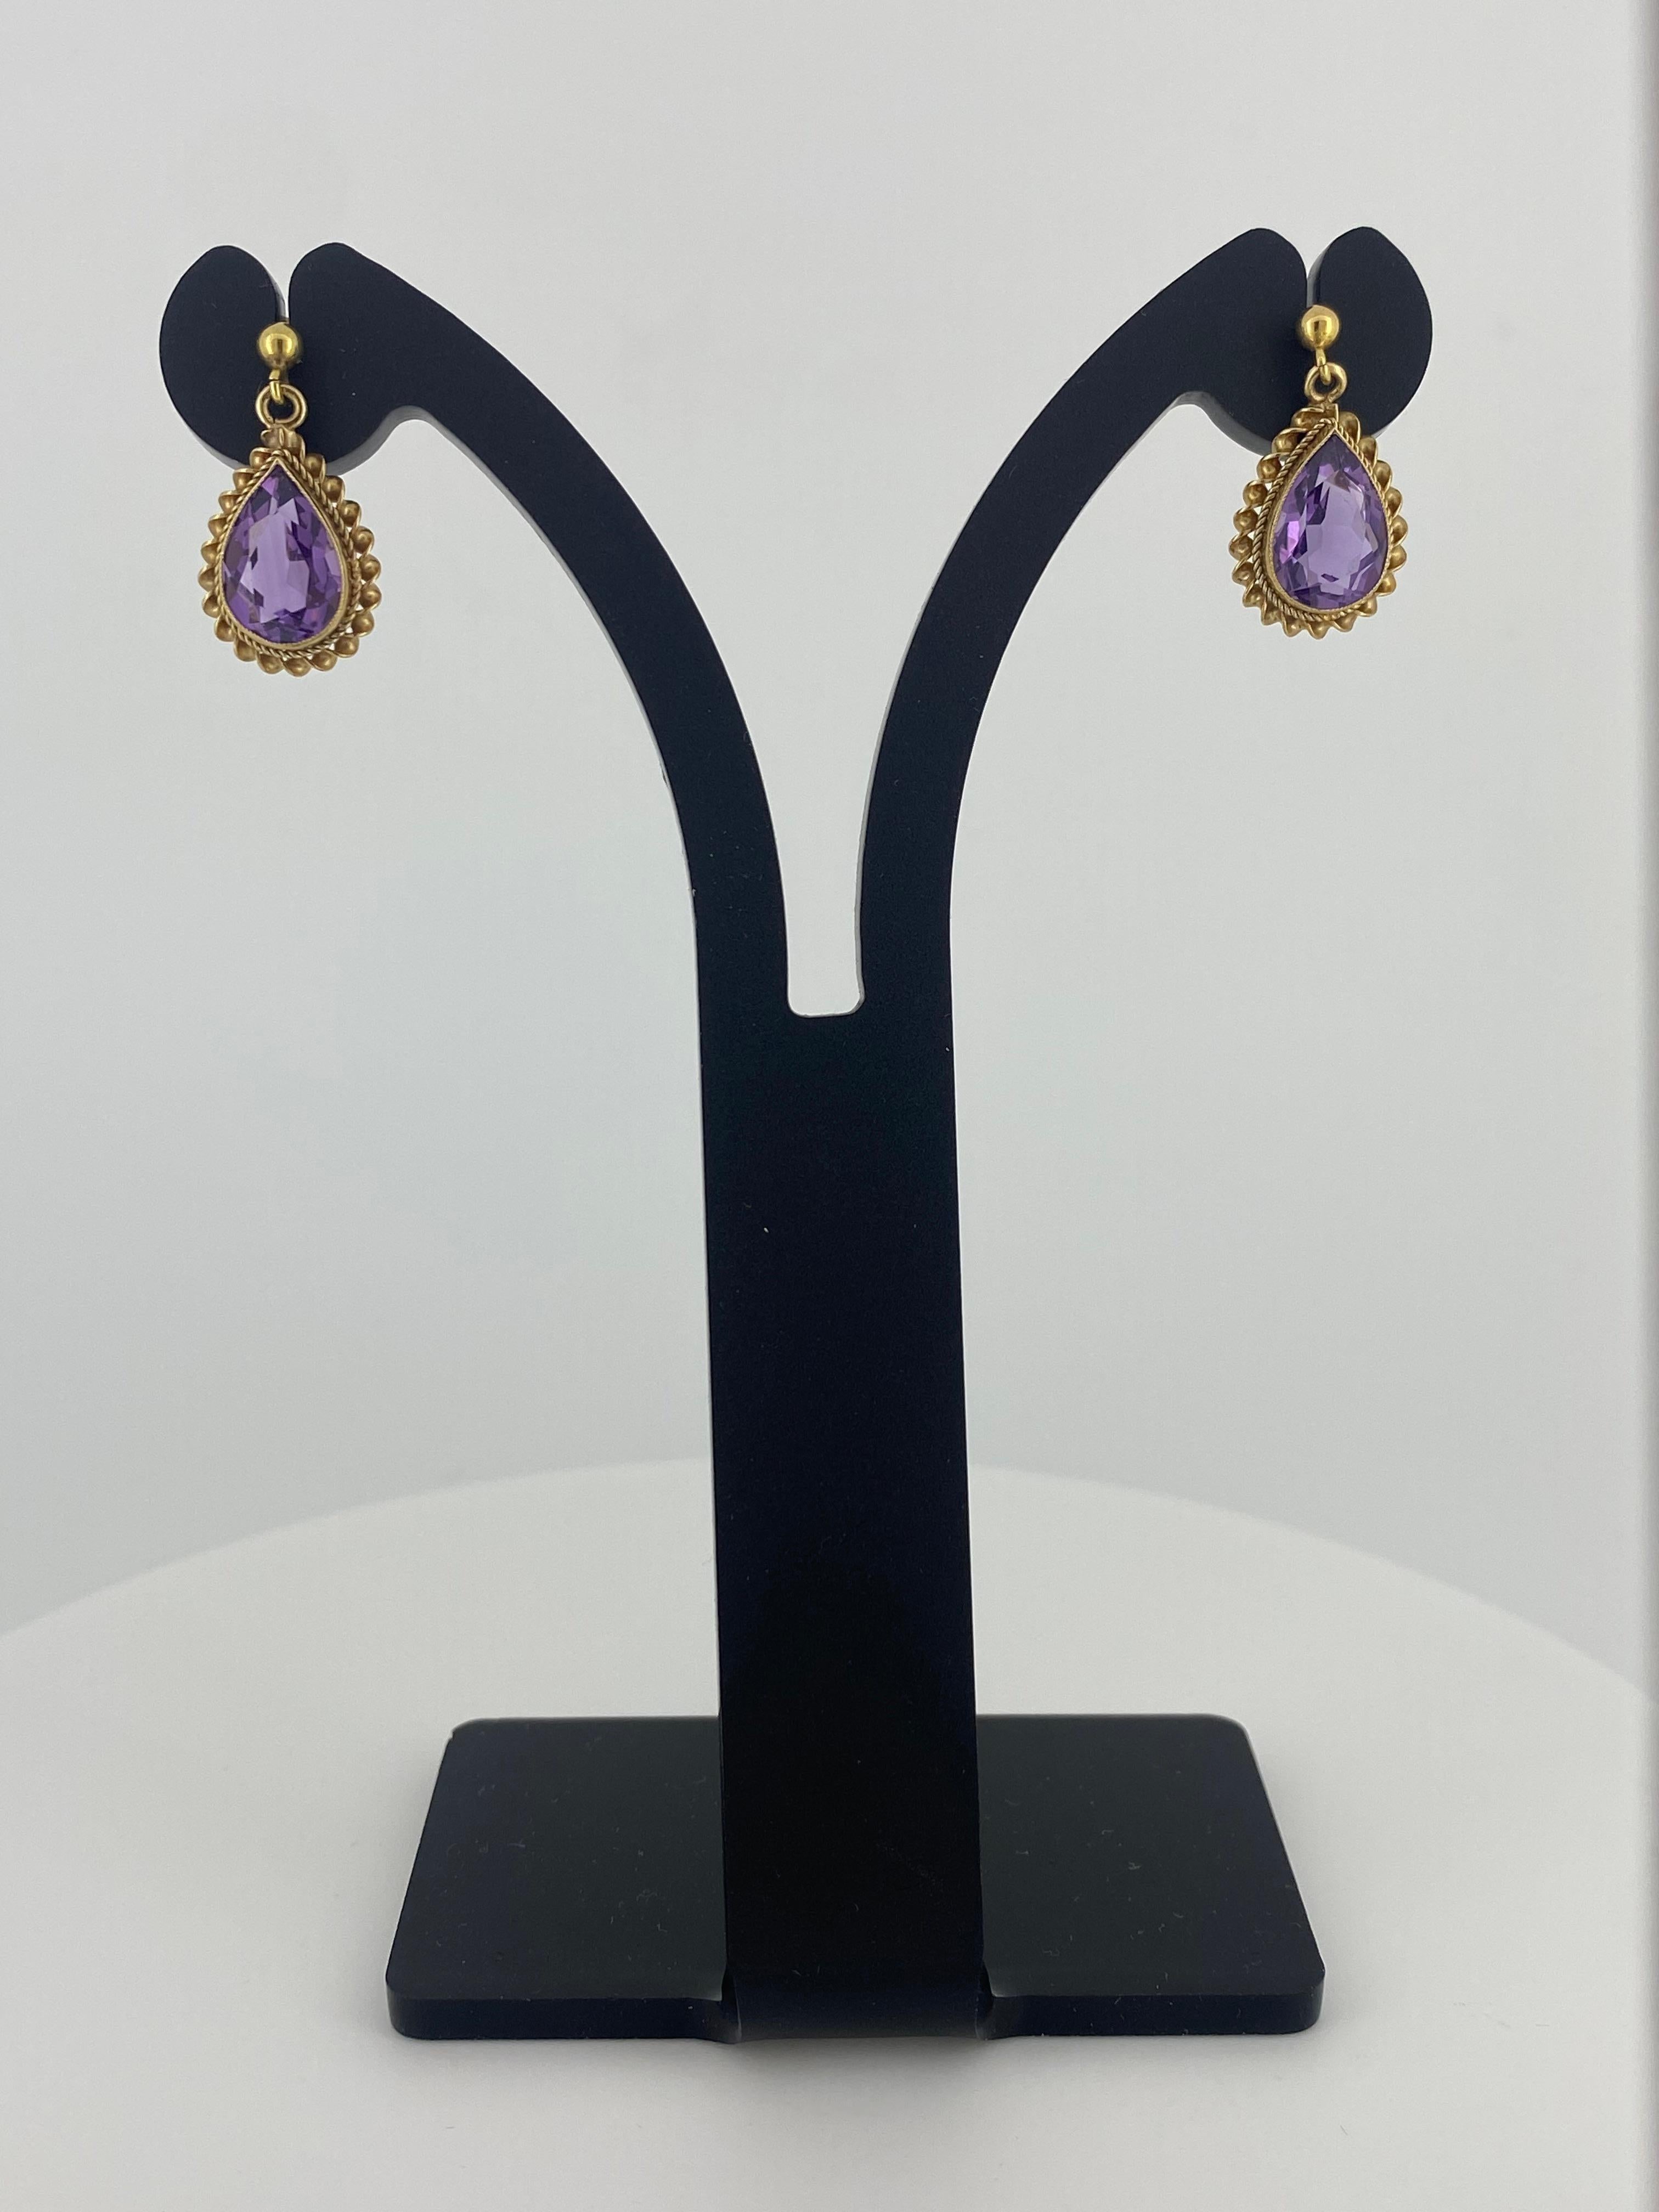 These Retro Handmade Drop Pendant Earrings
each feature Natural Amethyst 
of Royal Purple Colour, 
of impressive 2.50ct approx. (11mm x 8mm)
of desirable teardrop shape / pear cut 

In rubbed over setting, 
within an elaborate twisted rope border,